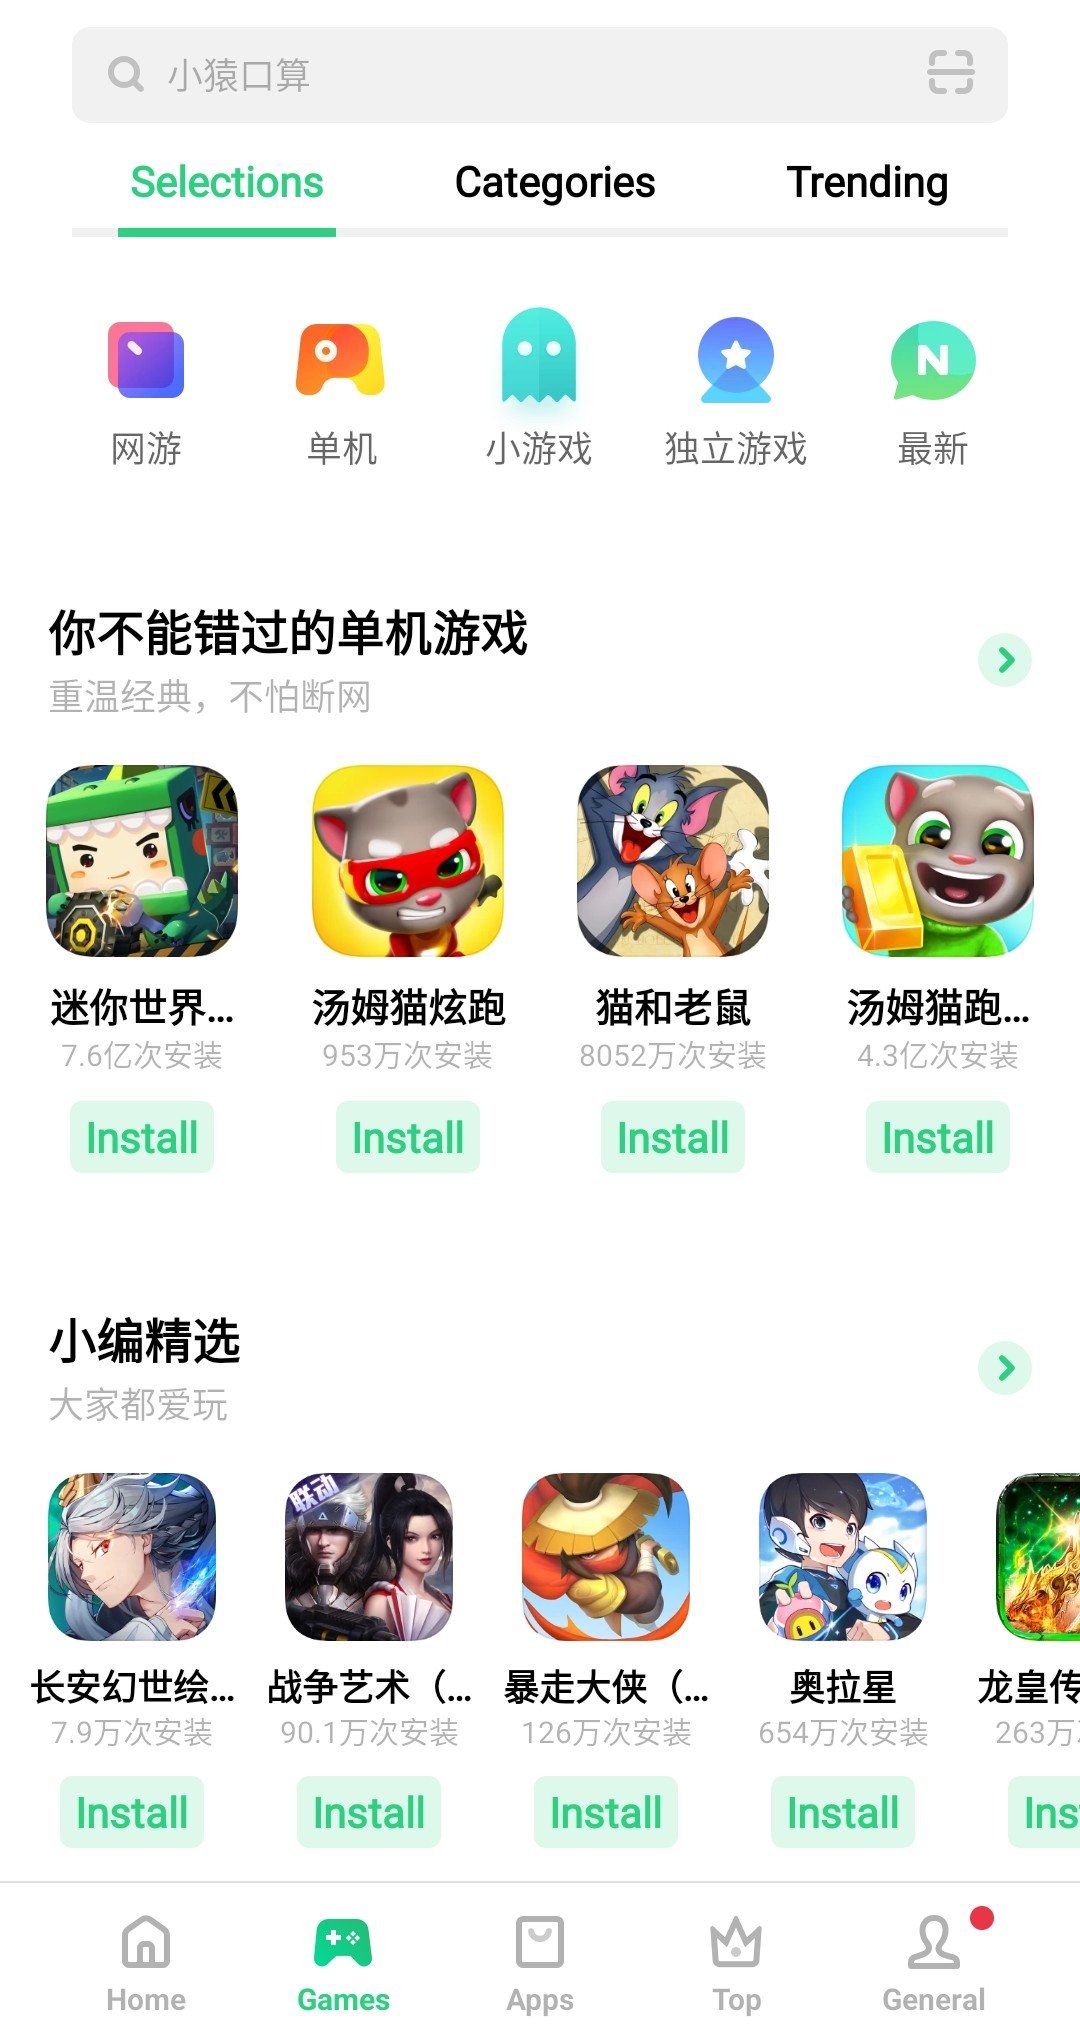 Oppo App Market 9.1.6 - Download for Android APK Free